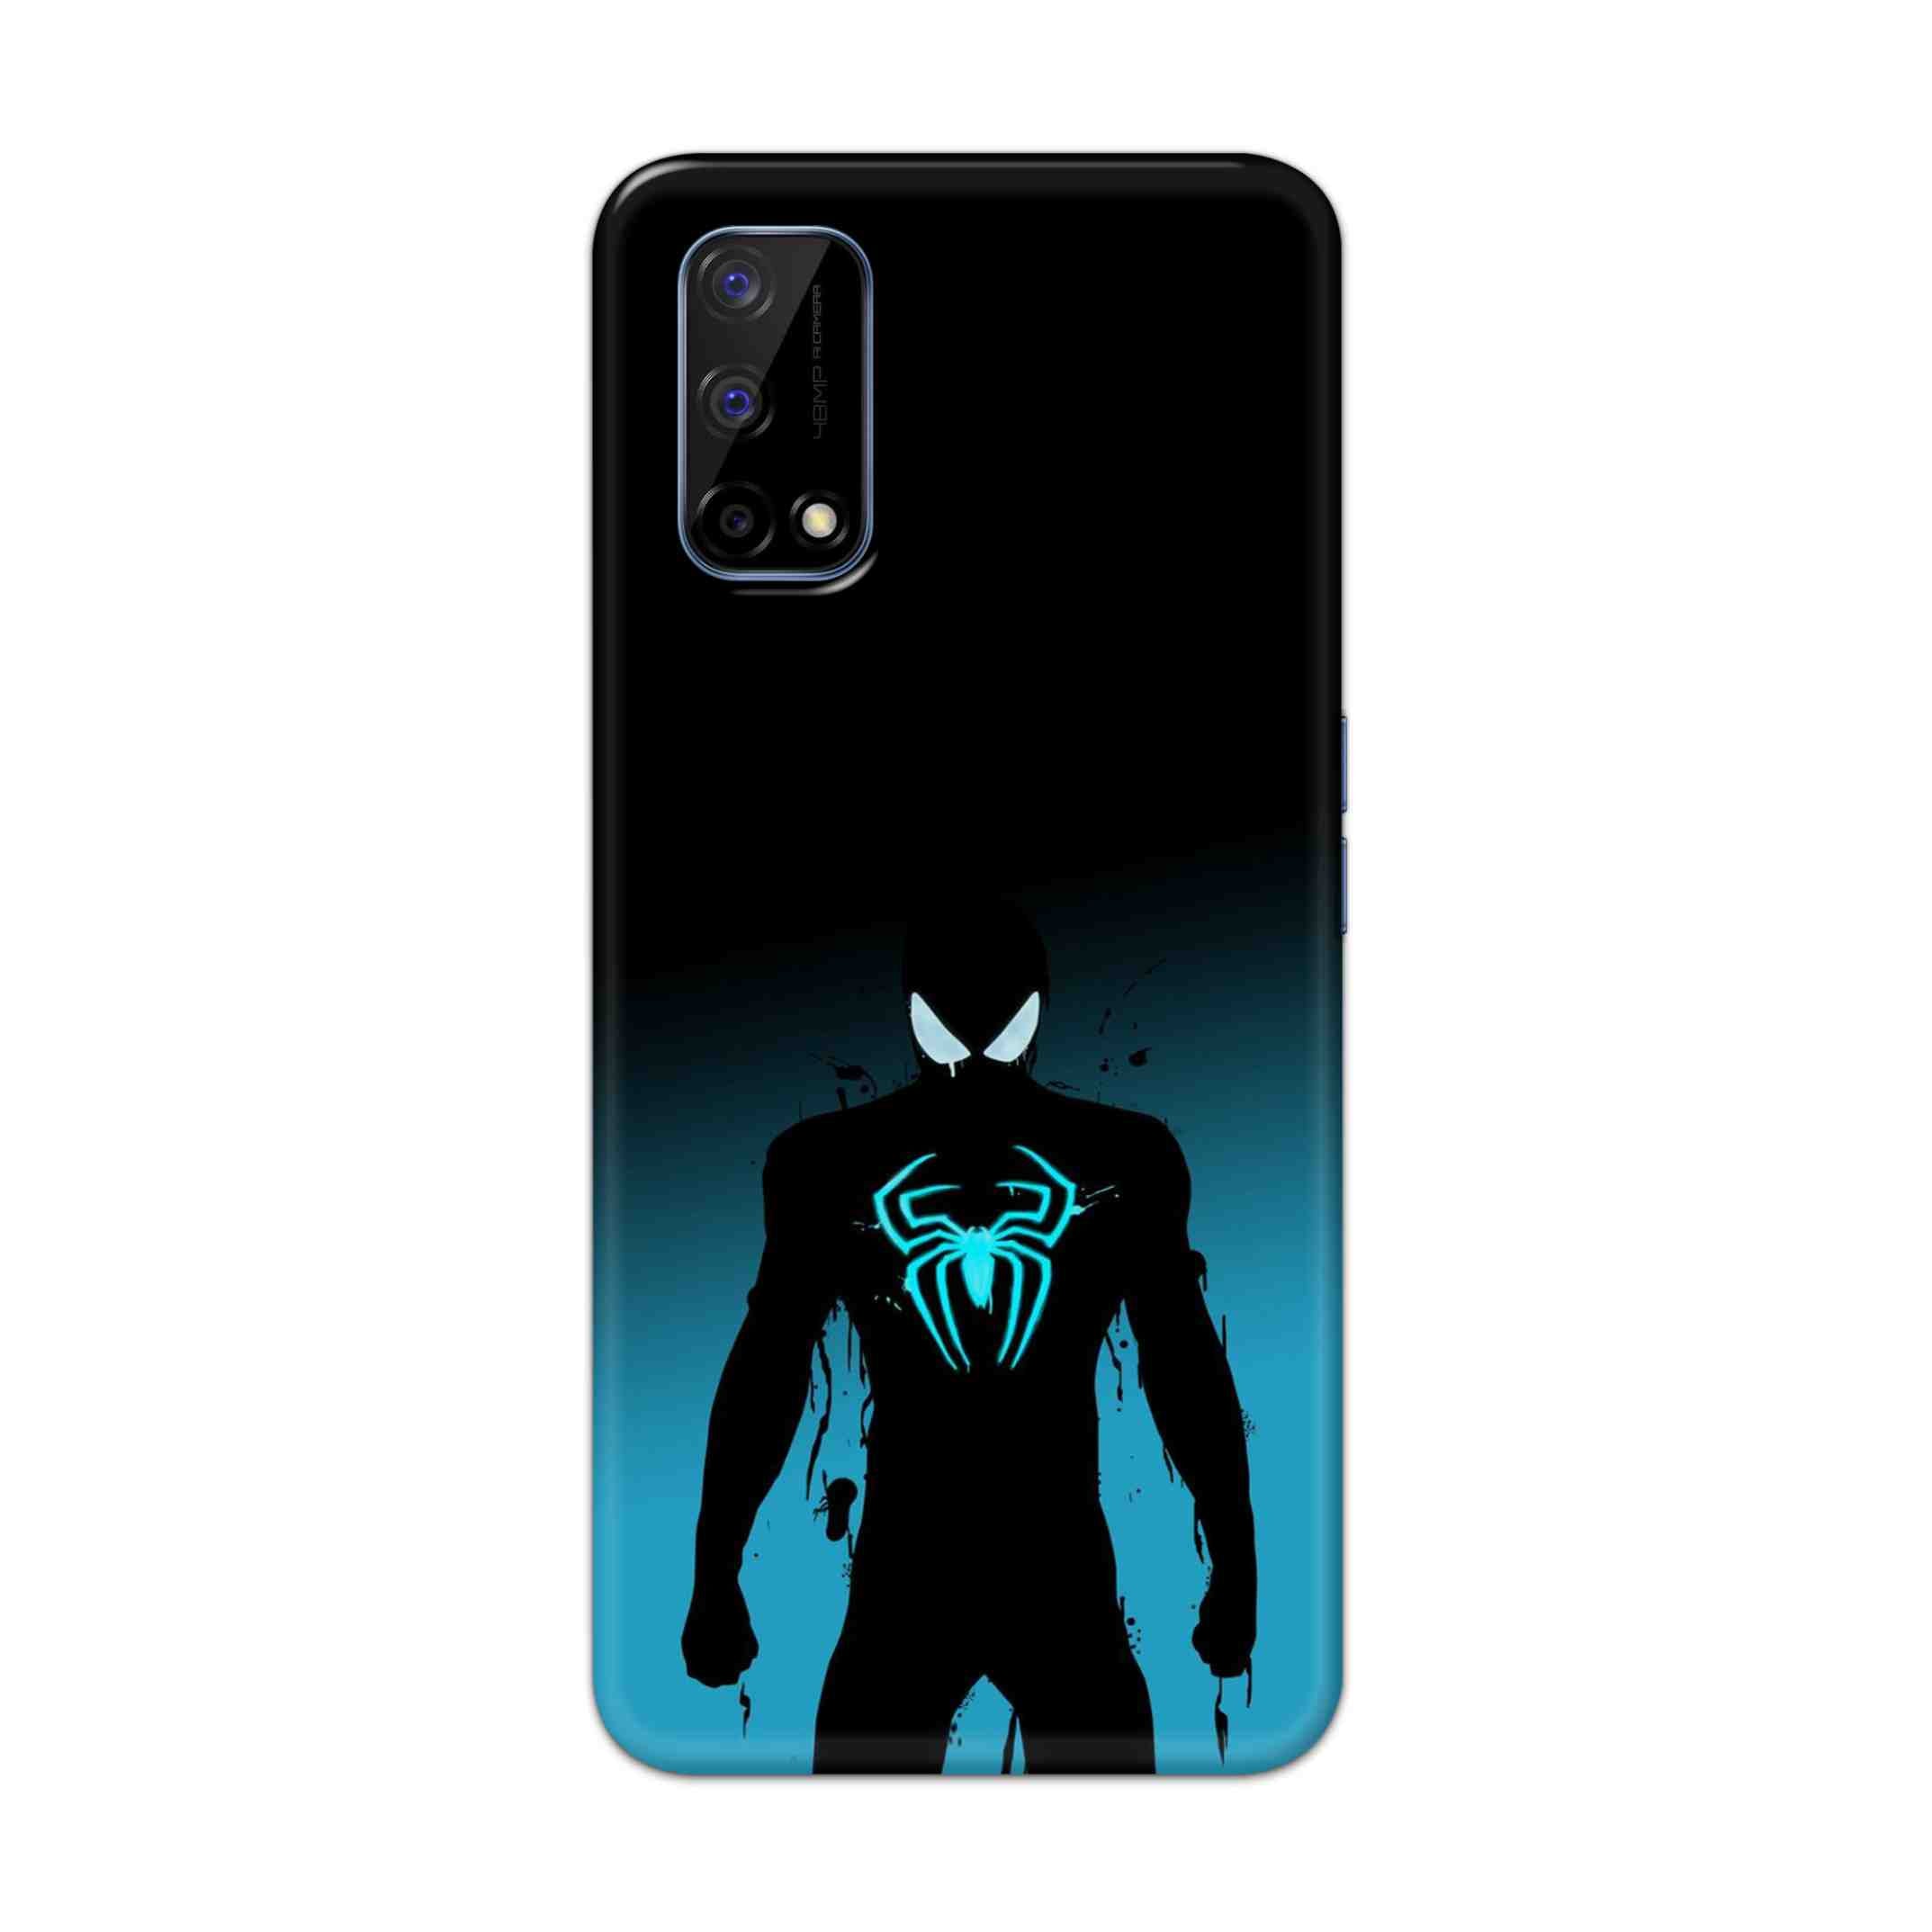 Buy Neon Spiderman Hard Back Mobile Phone Case Cover For Realme Narzo 30 Pro Online